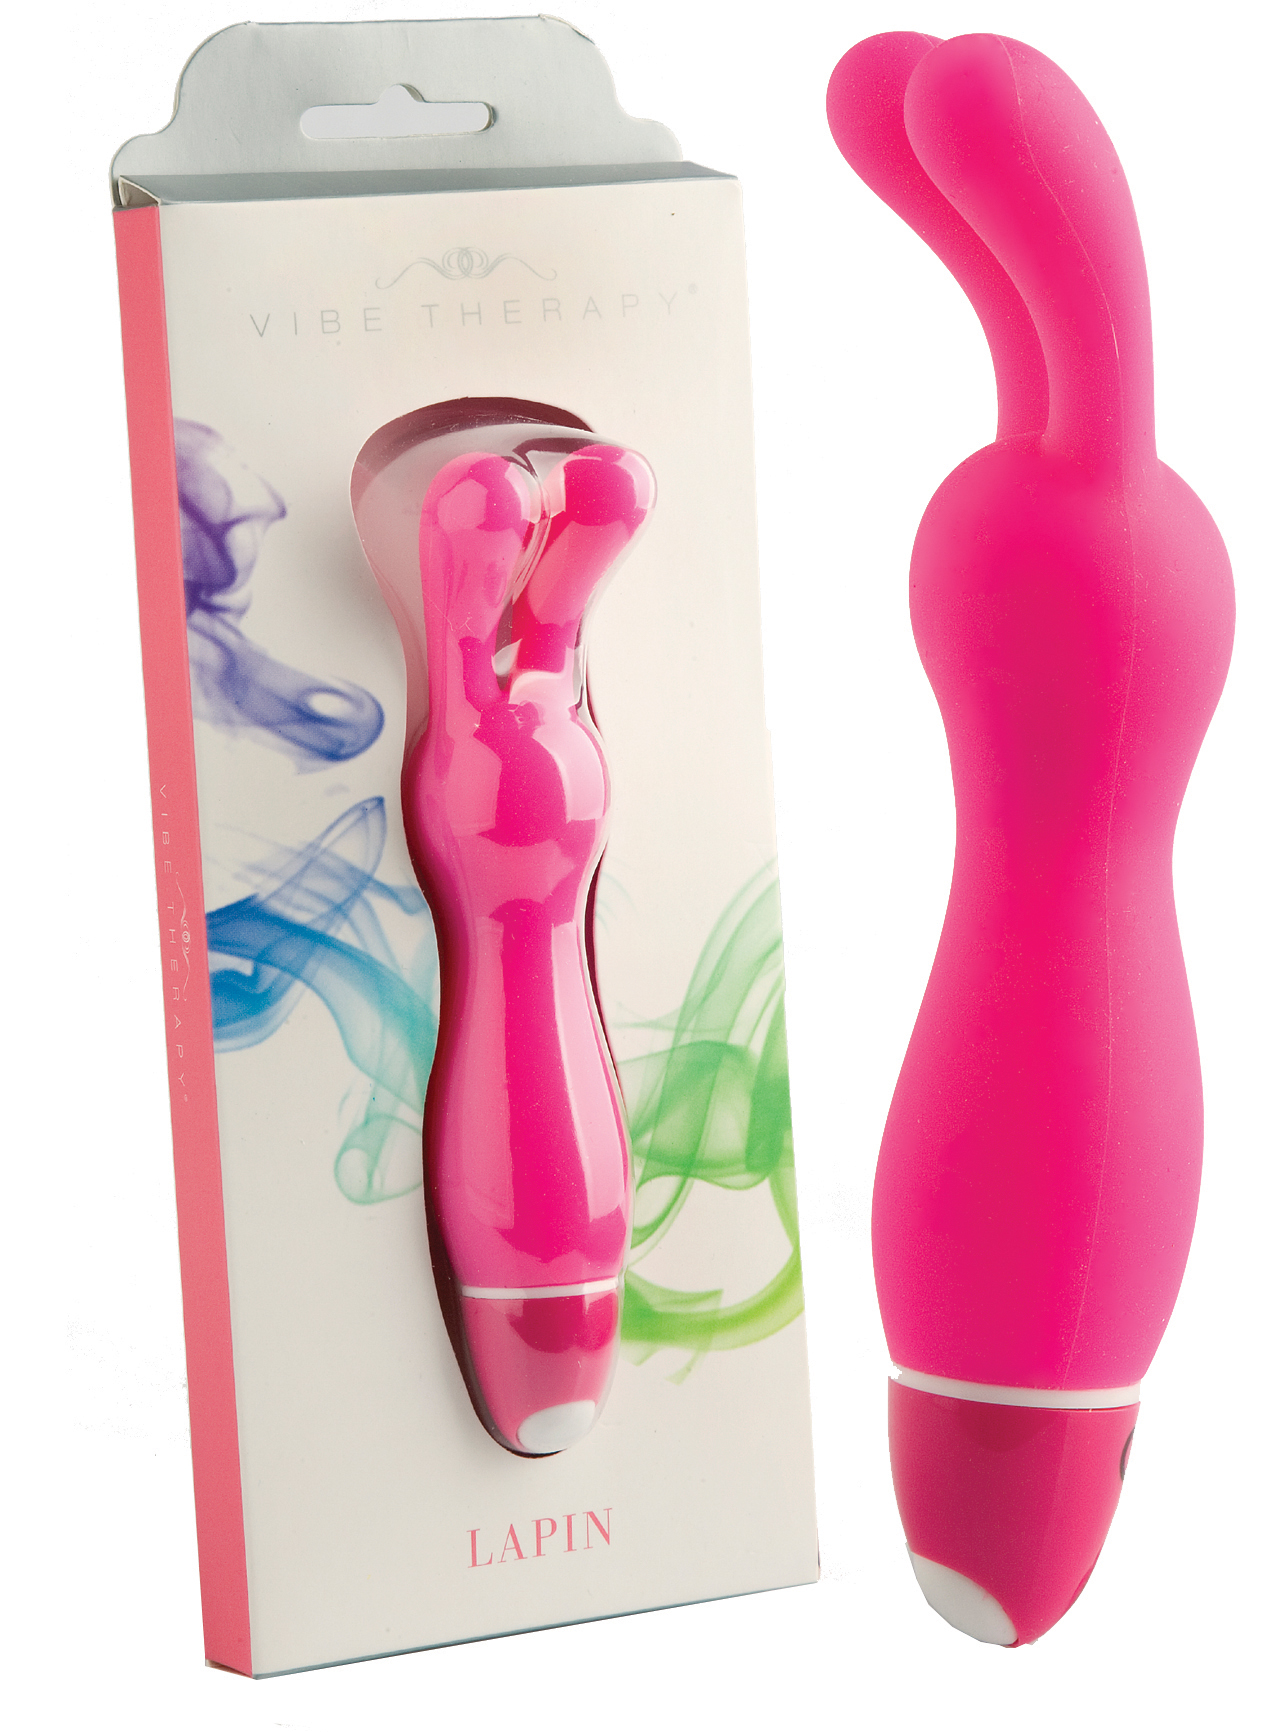 Vibe Therapy Lapin pink